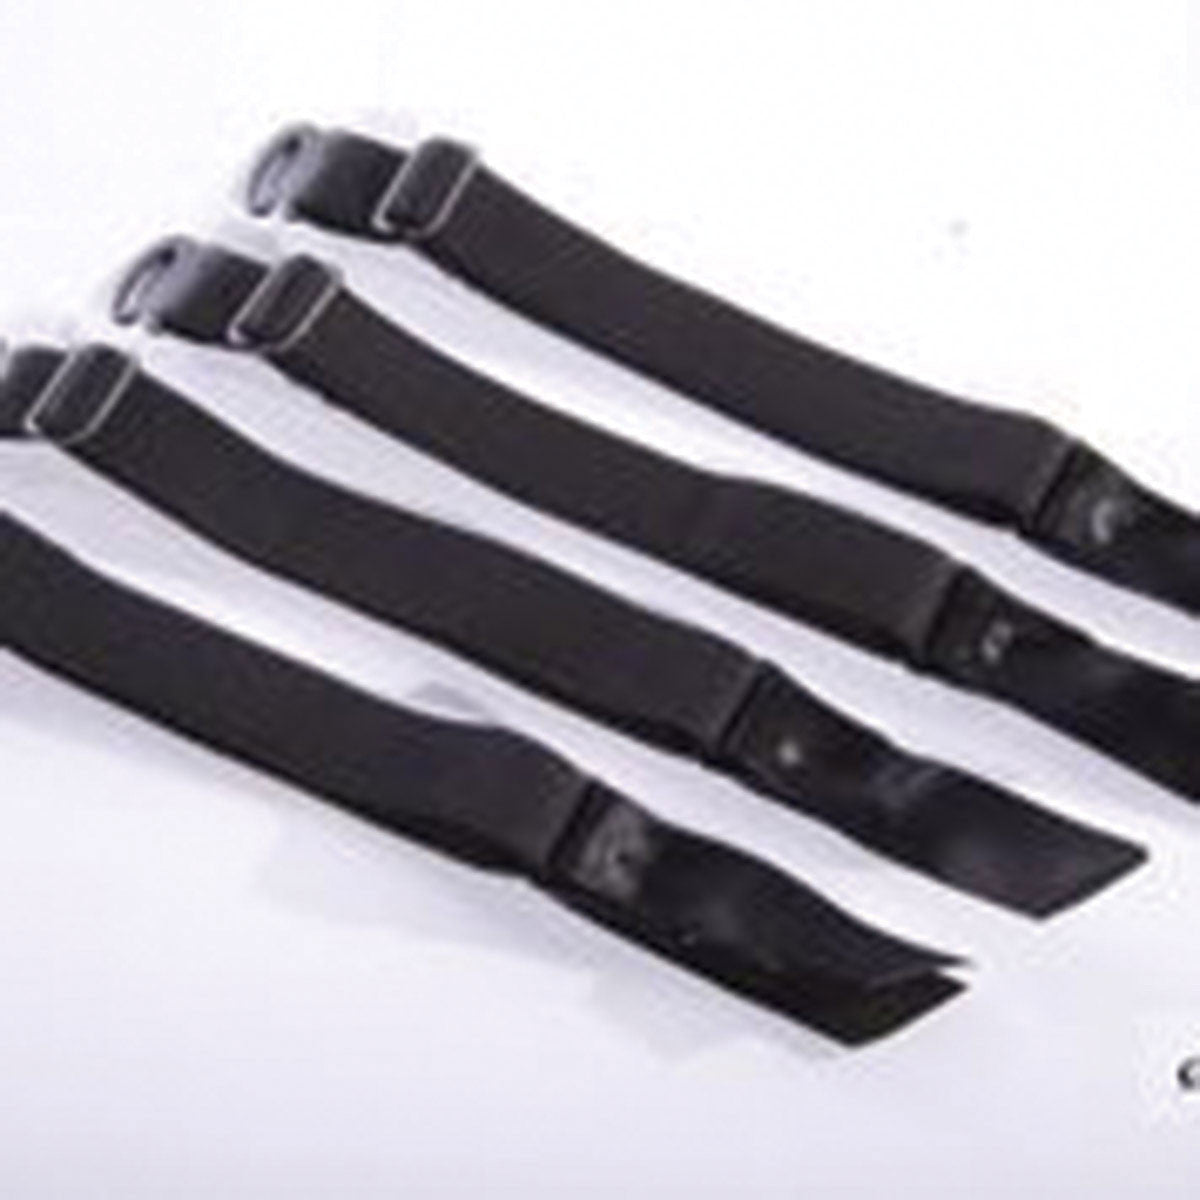 Removable Black Garters Set 4pc by Spareparts Hardwear | Melody's Room